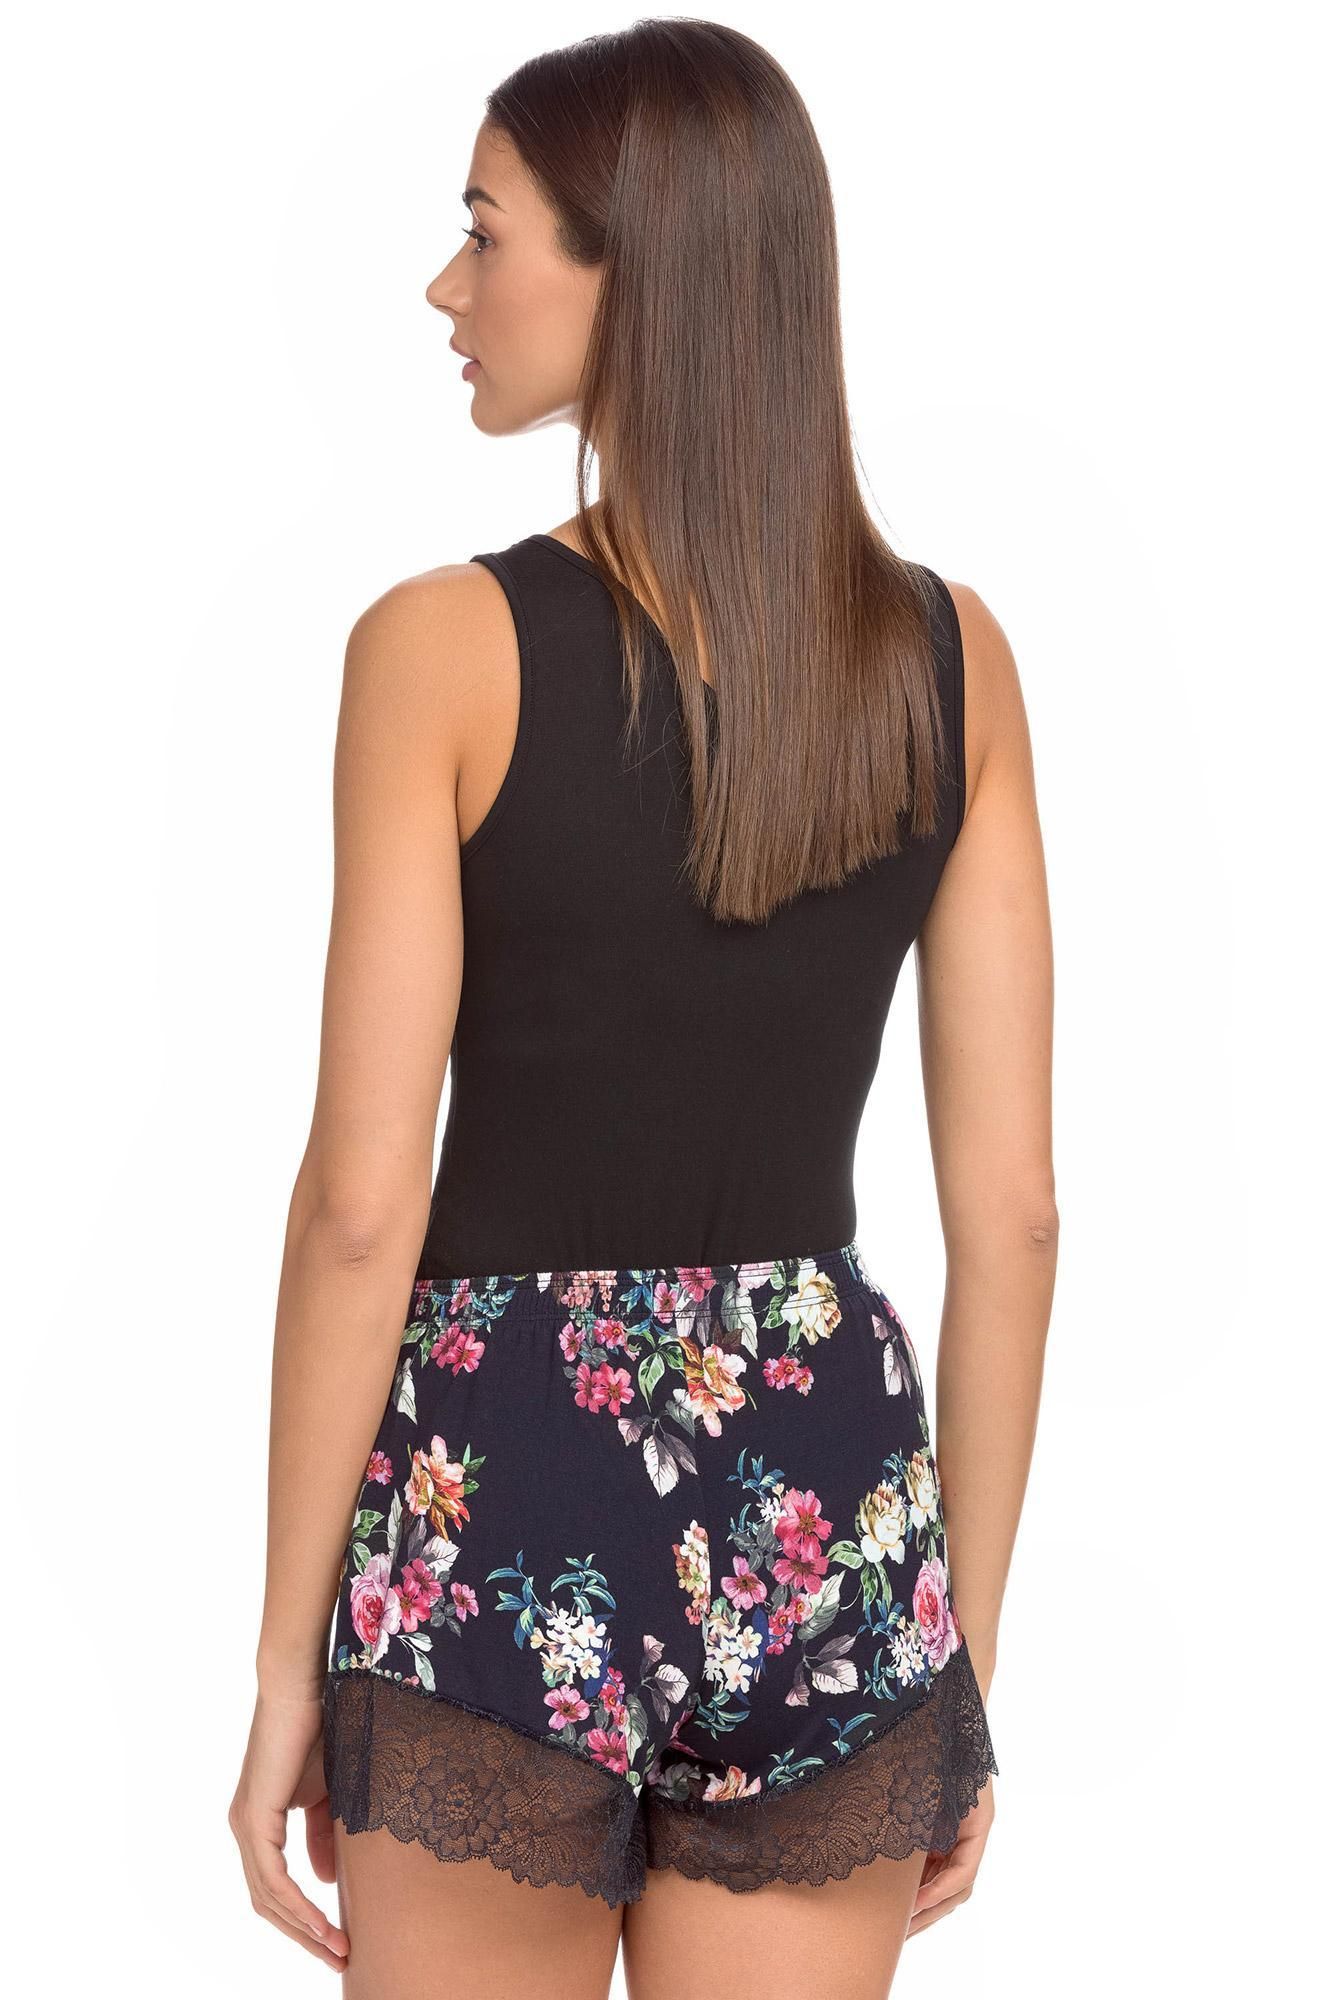 Women’s shorts in floral design